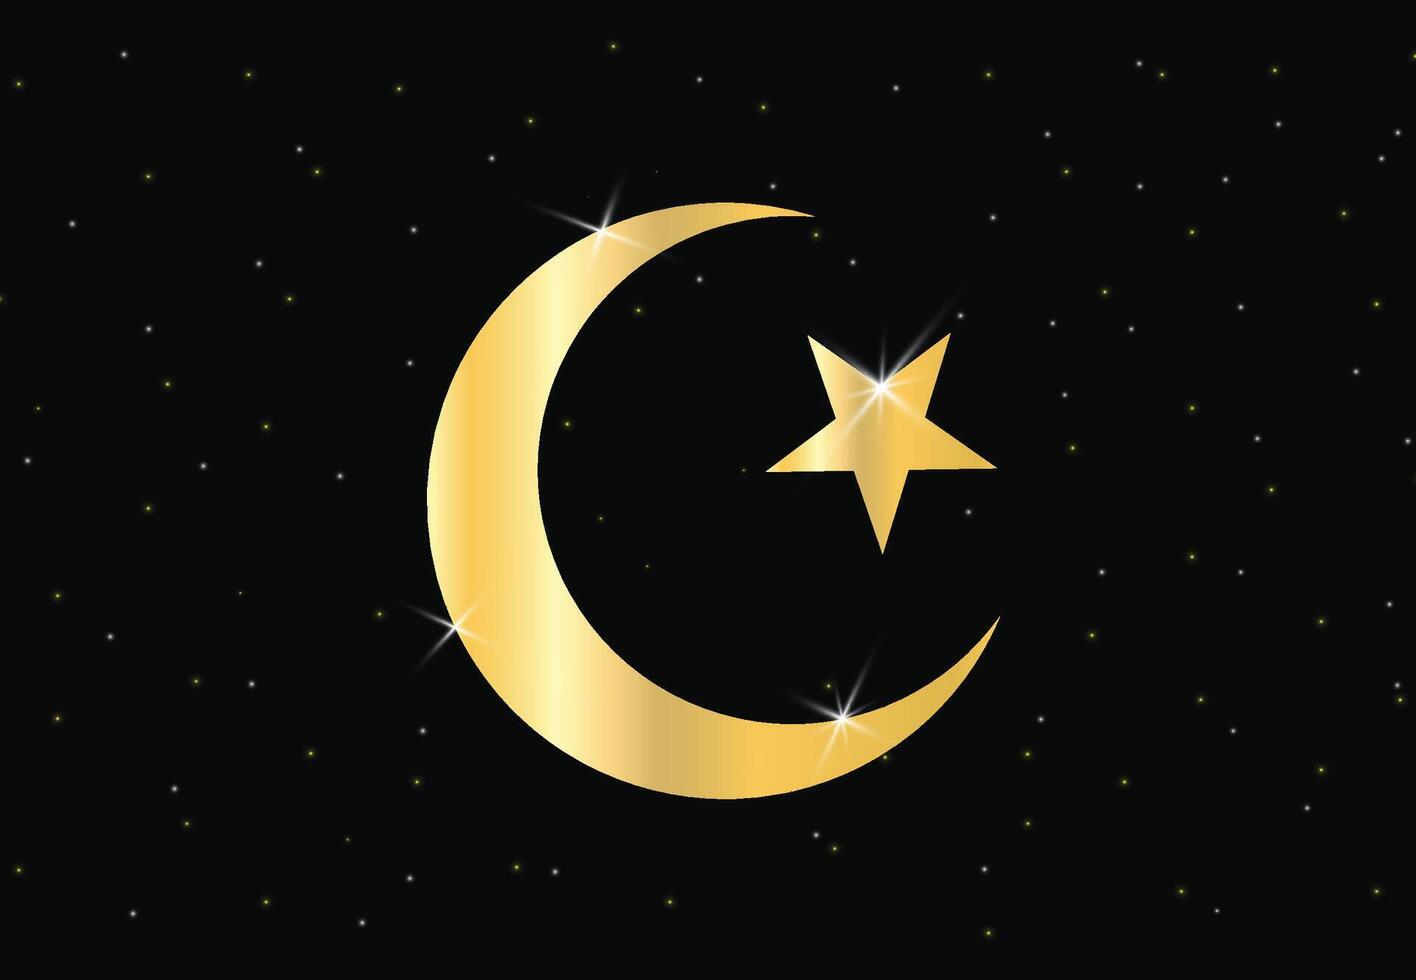 The star and crescent moon symbol of islam islamic icon for mosque or Ramadhan banner vector